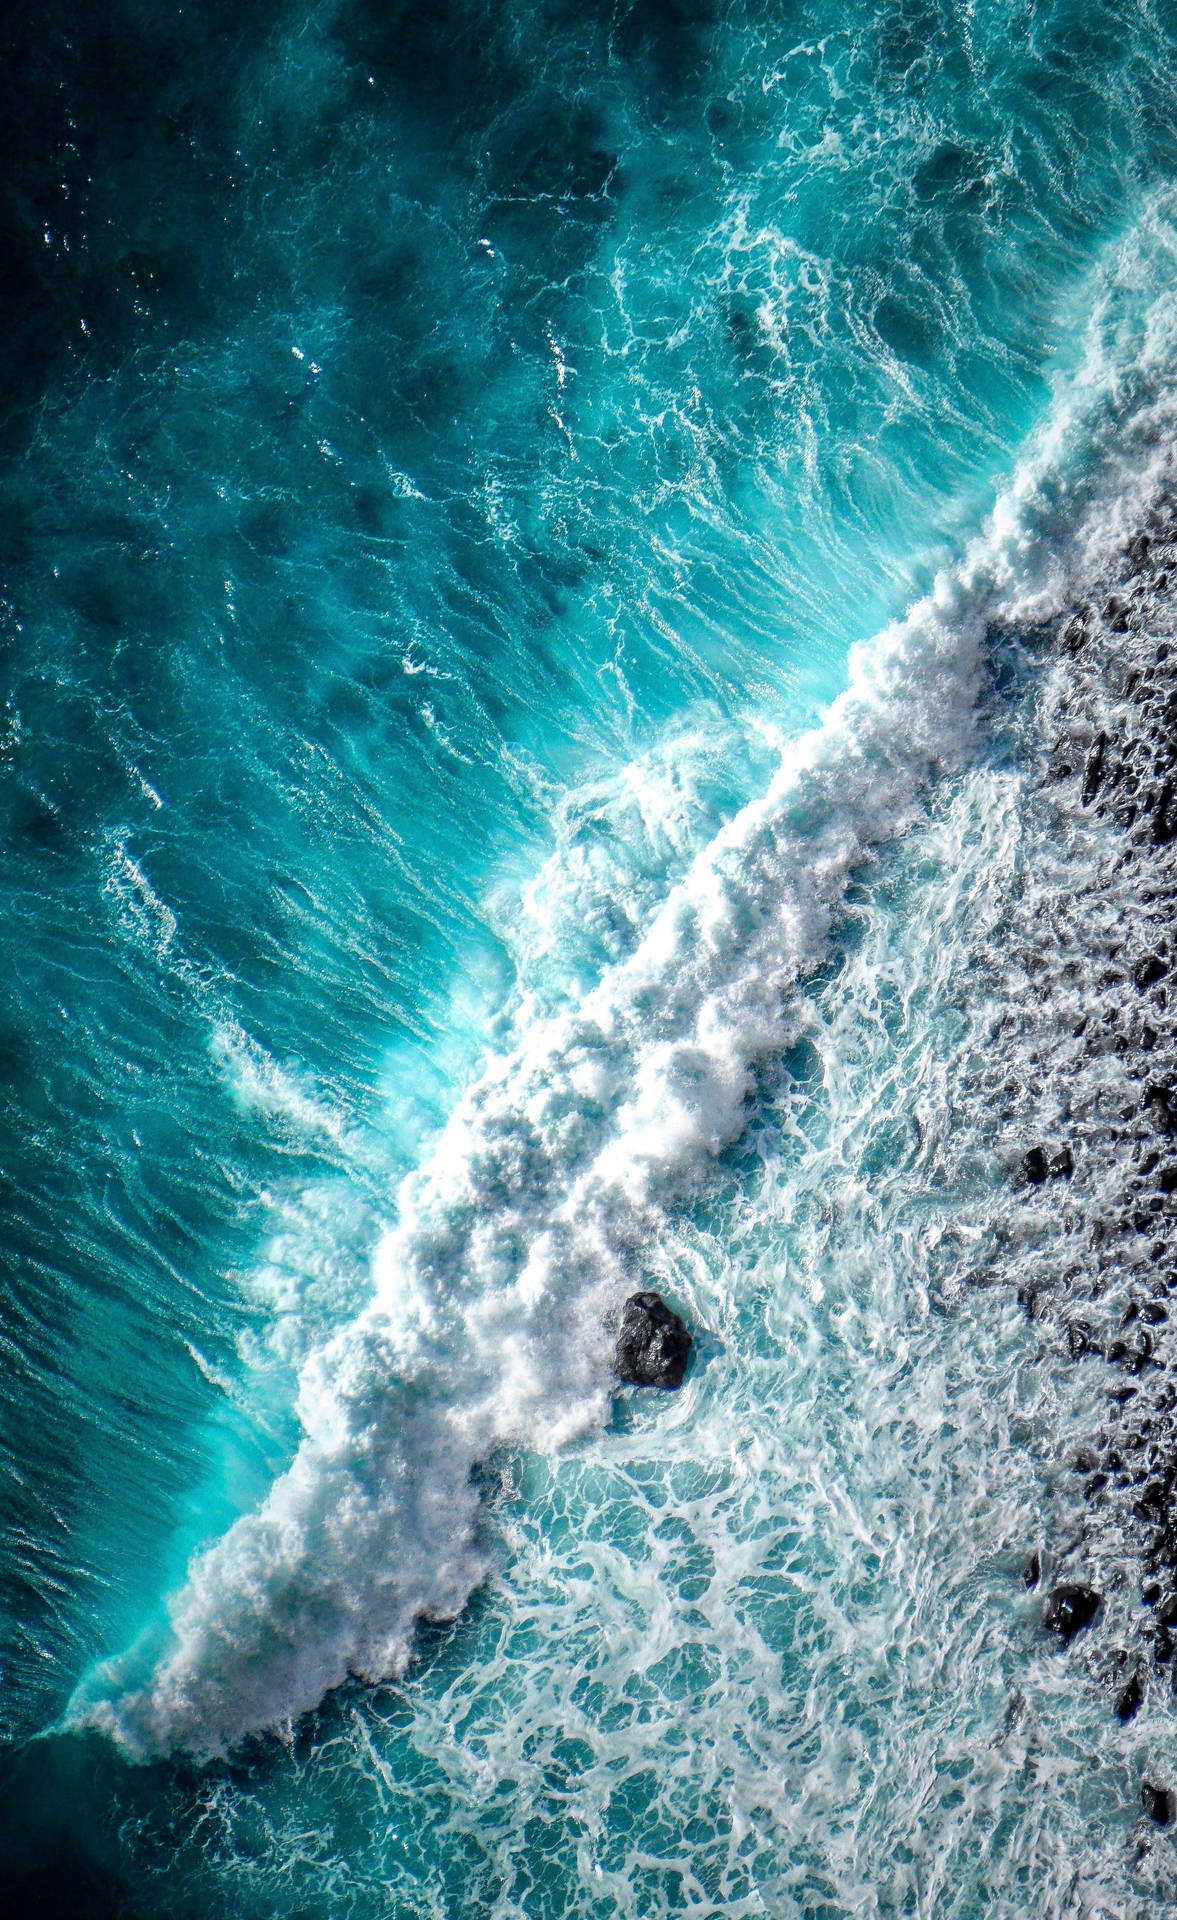 Cool Top View Shot Of Beach Wave Iphone Wallpaper